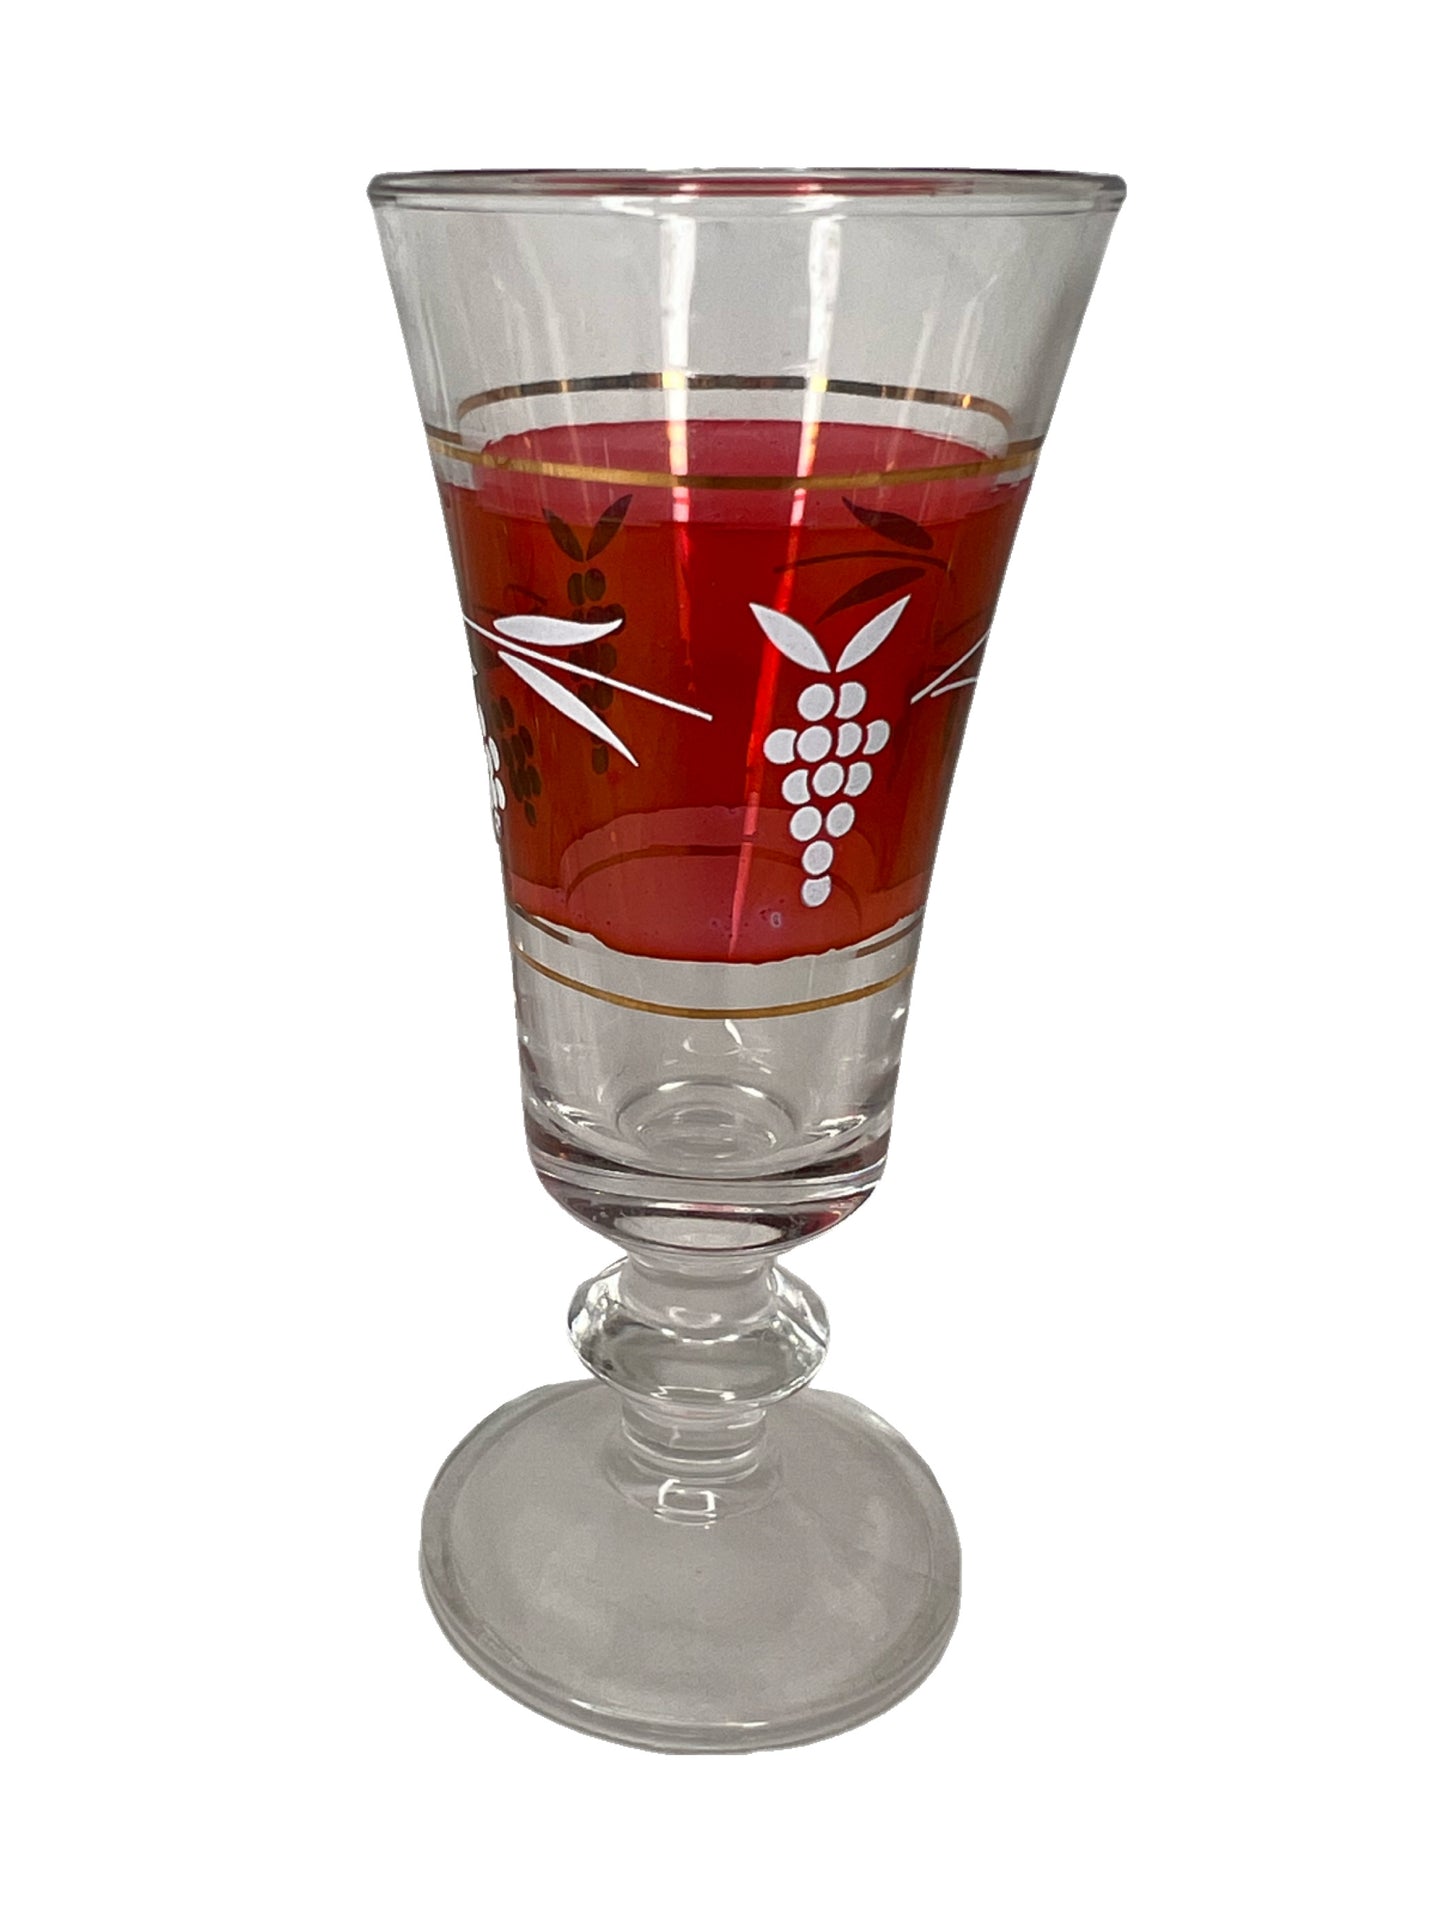 Set Of 4 Red Aperitif Glasses with Grapes